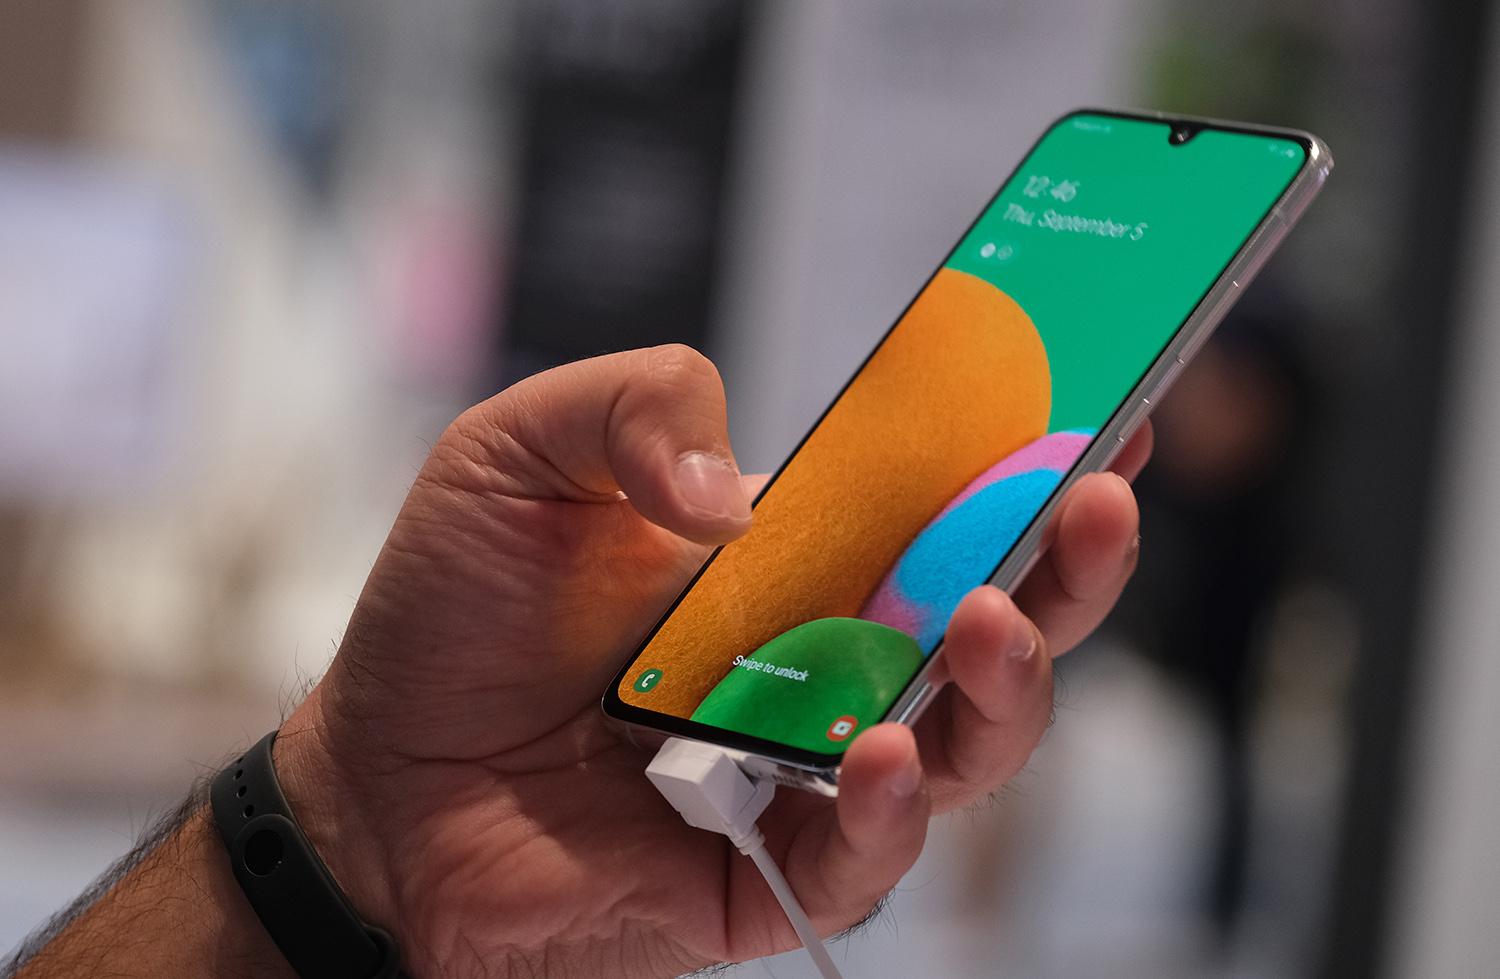 The Bahamut threat group has reemerged from a year silence to target Android mobile devices in the Middle East and South Asia. Pictured: Visitors have a look at the Samsung A90 5G smartphone at the 2019 IFA home electronics and appliances trade fair on Sept. 5, 2019, in Berlin. (Photo by Sean Gallup/Getty Images)